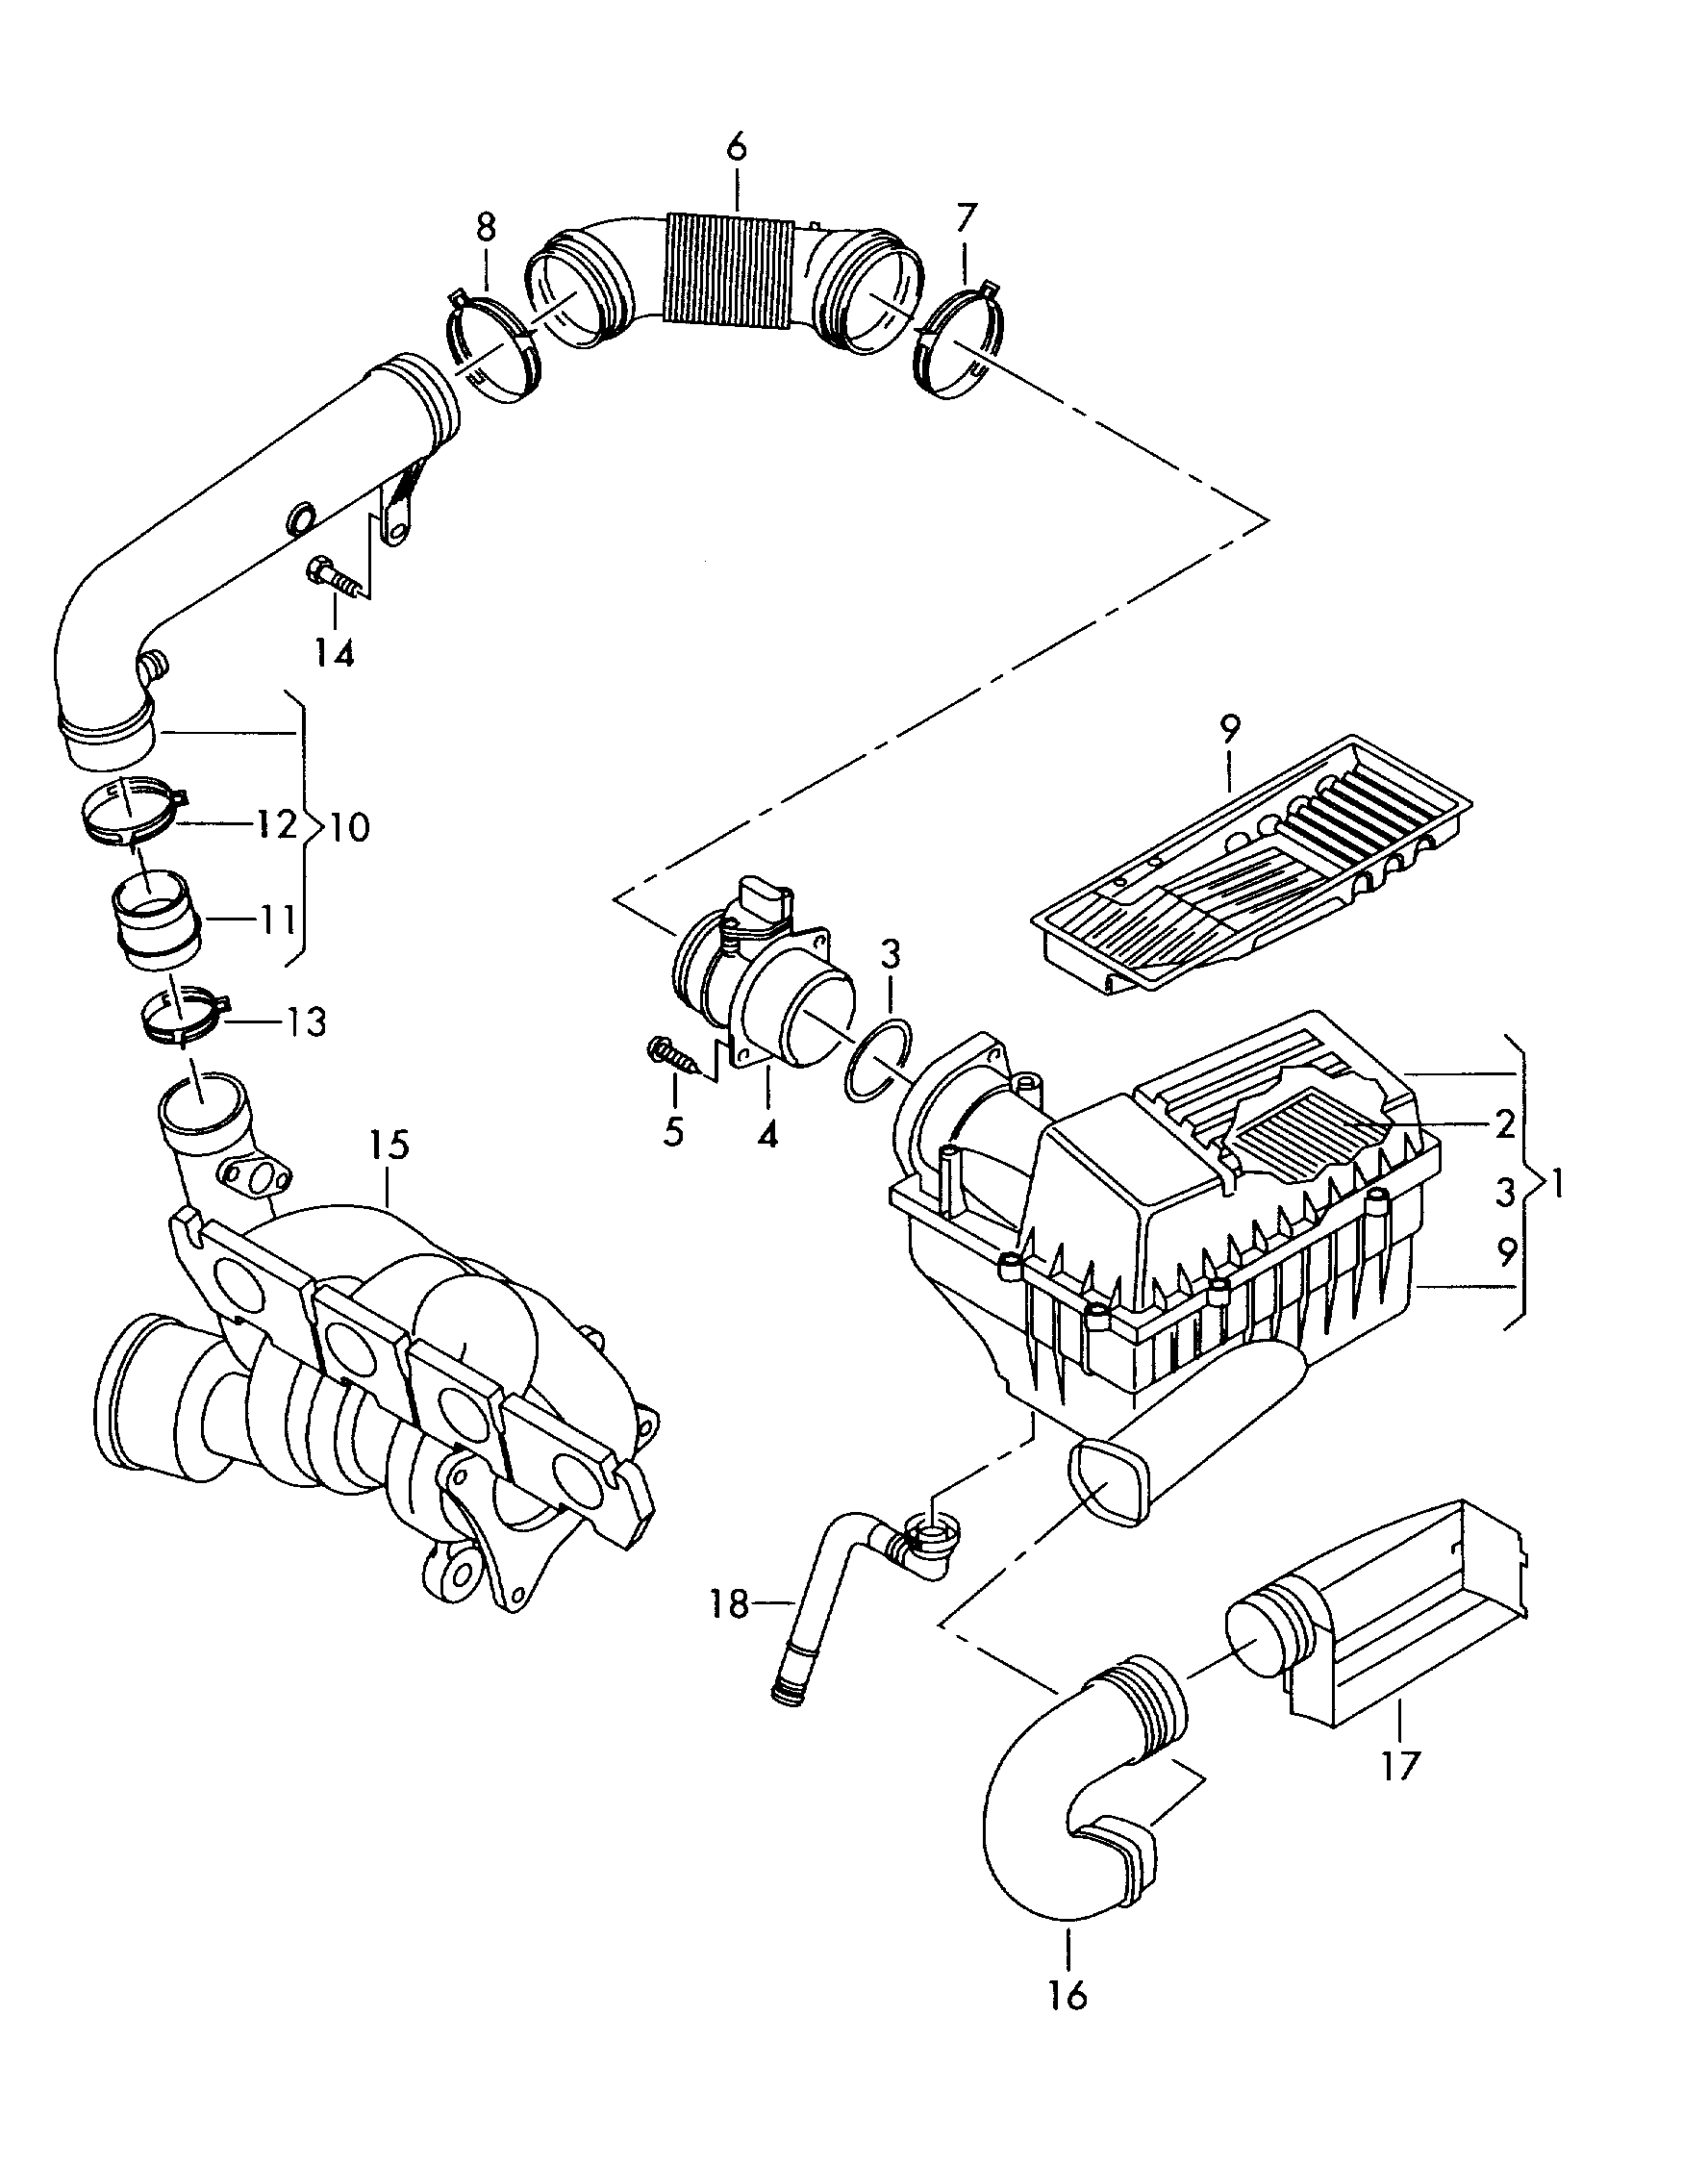 Air filter with connecting<br>parts 2.0 Ltr. - Golf/Variant/4Motion - golf